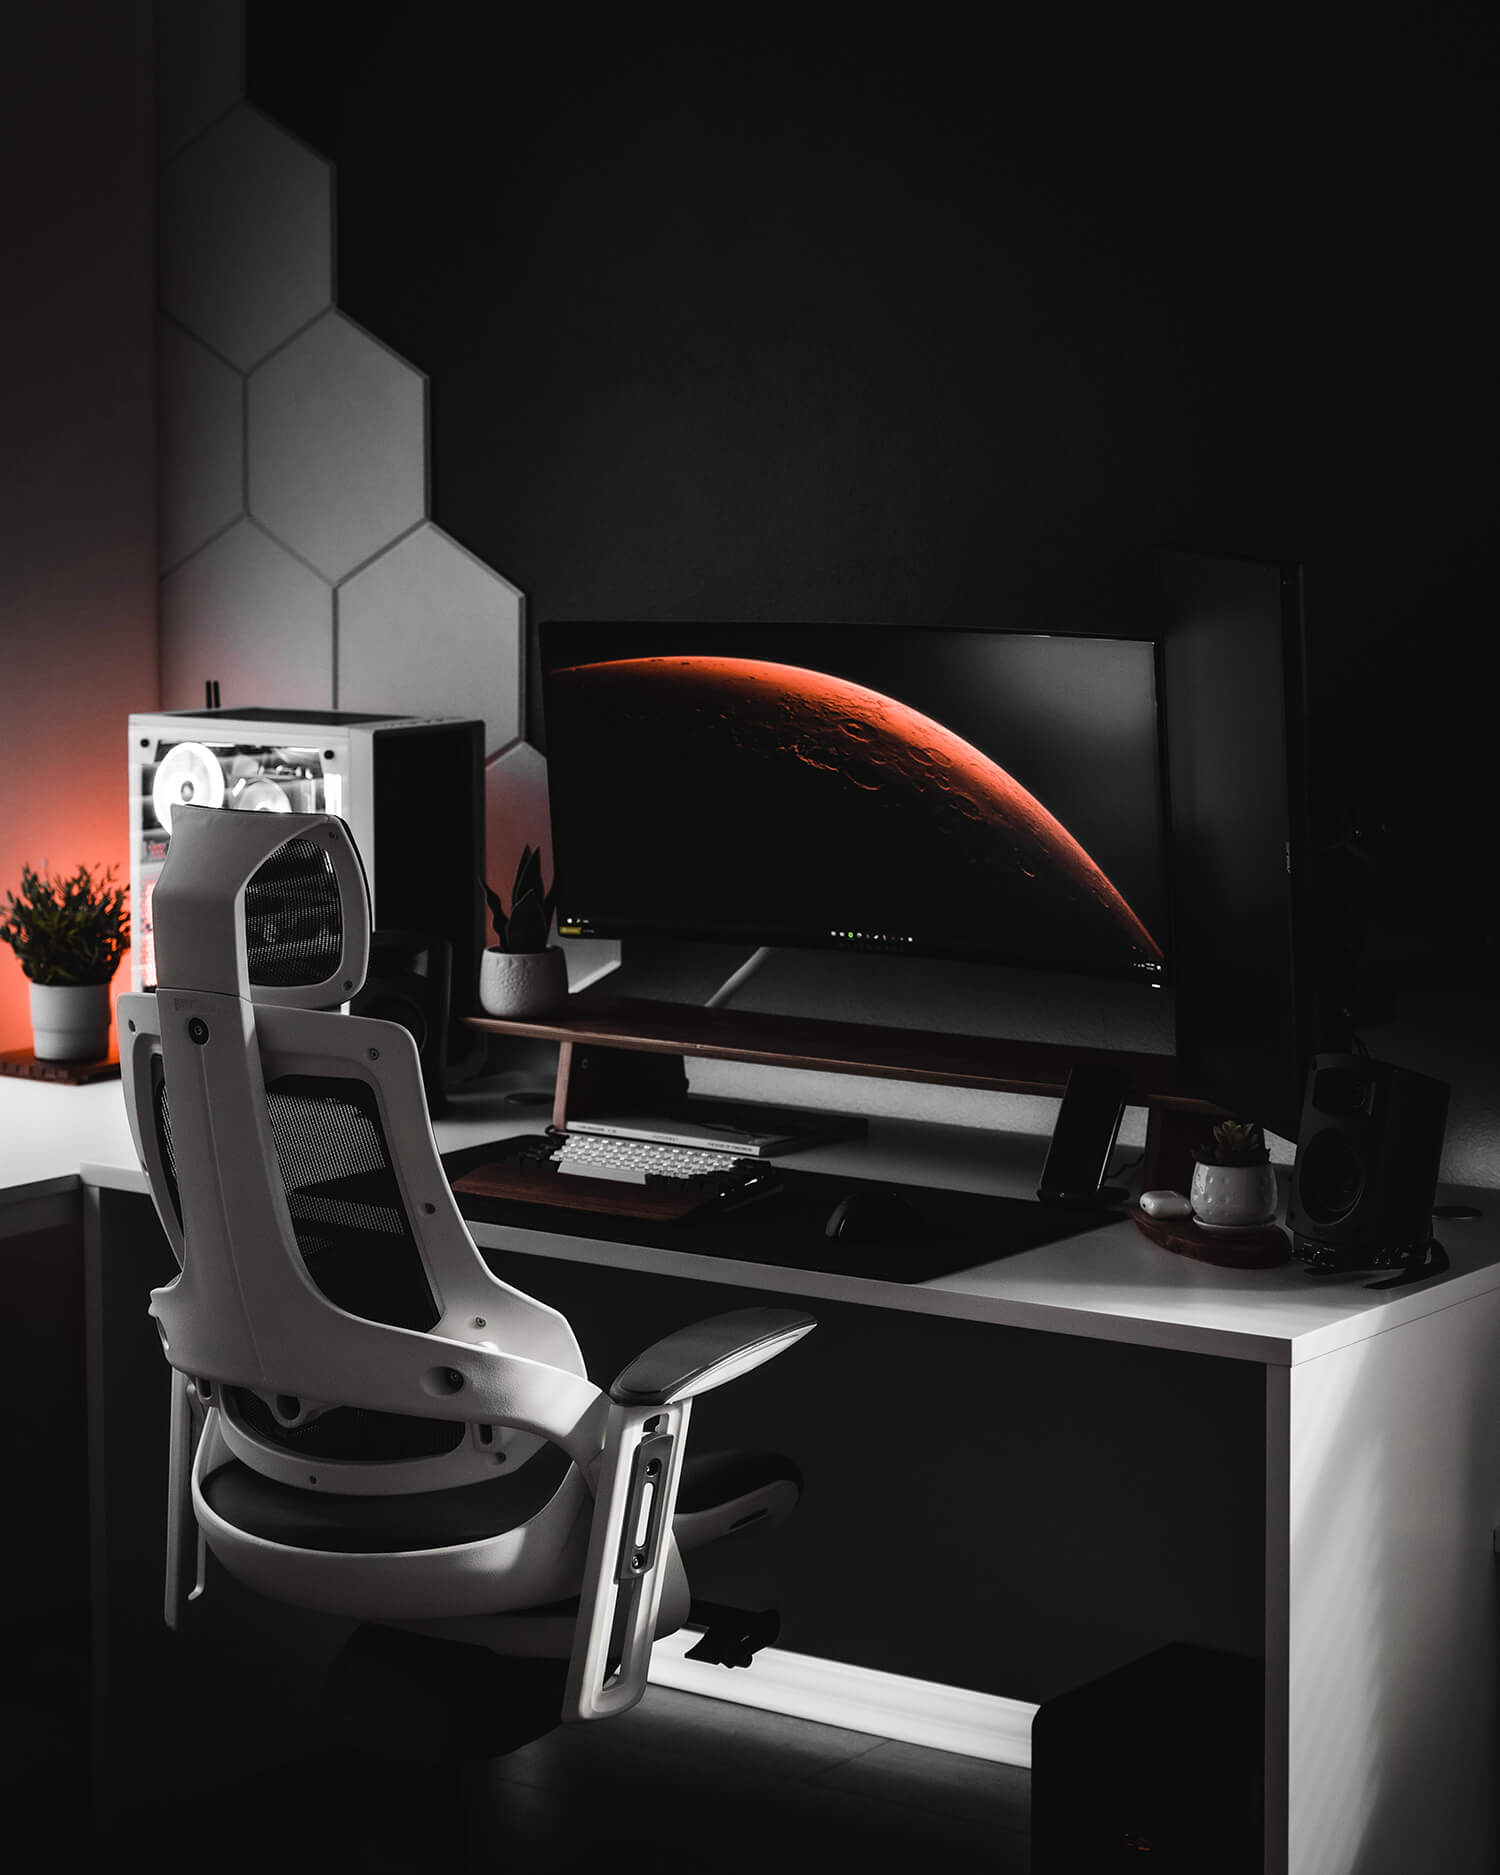 A futuristic gaming setup with an ergonomic chair and hexagonal wall panels